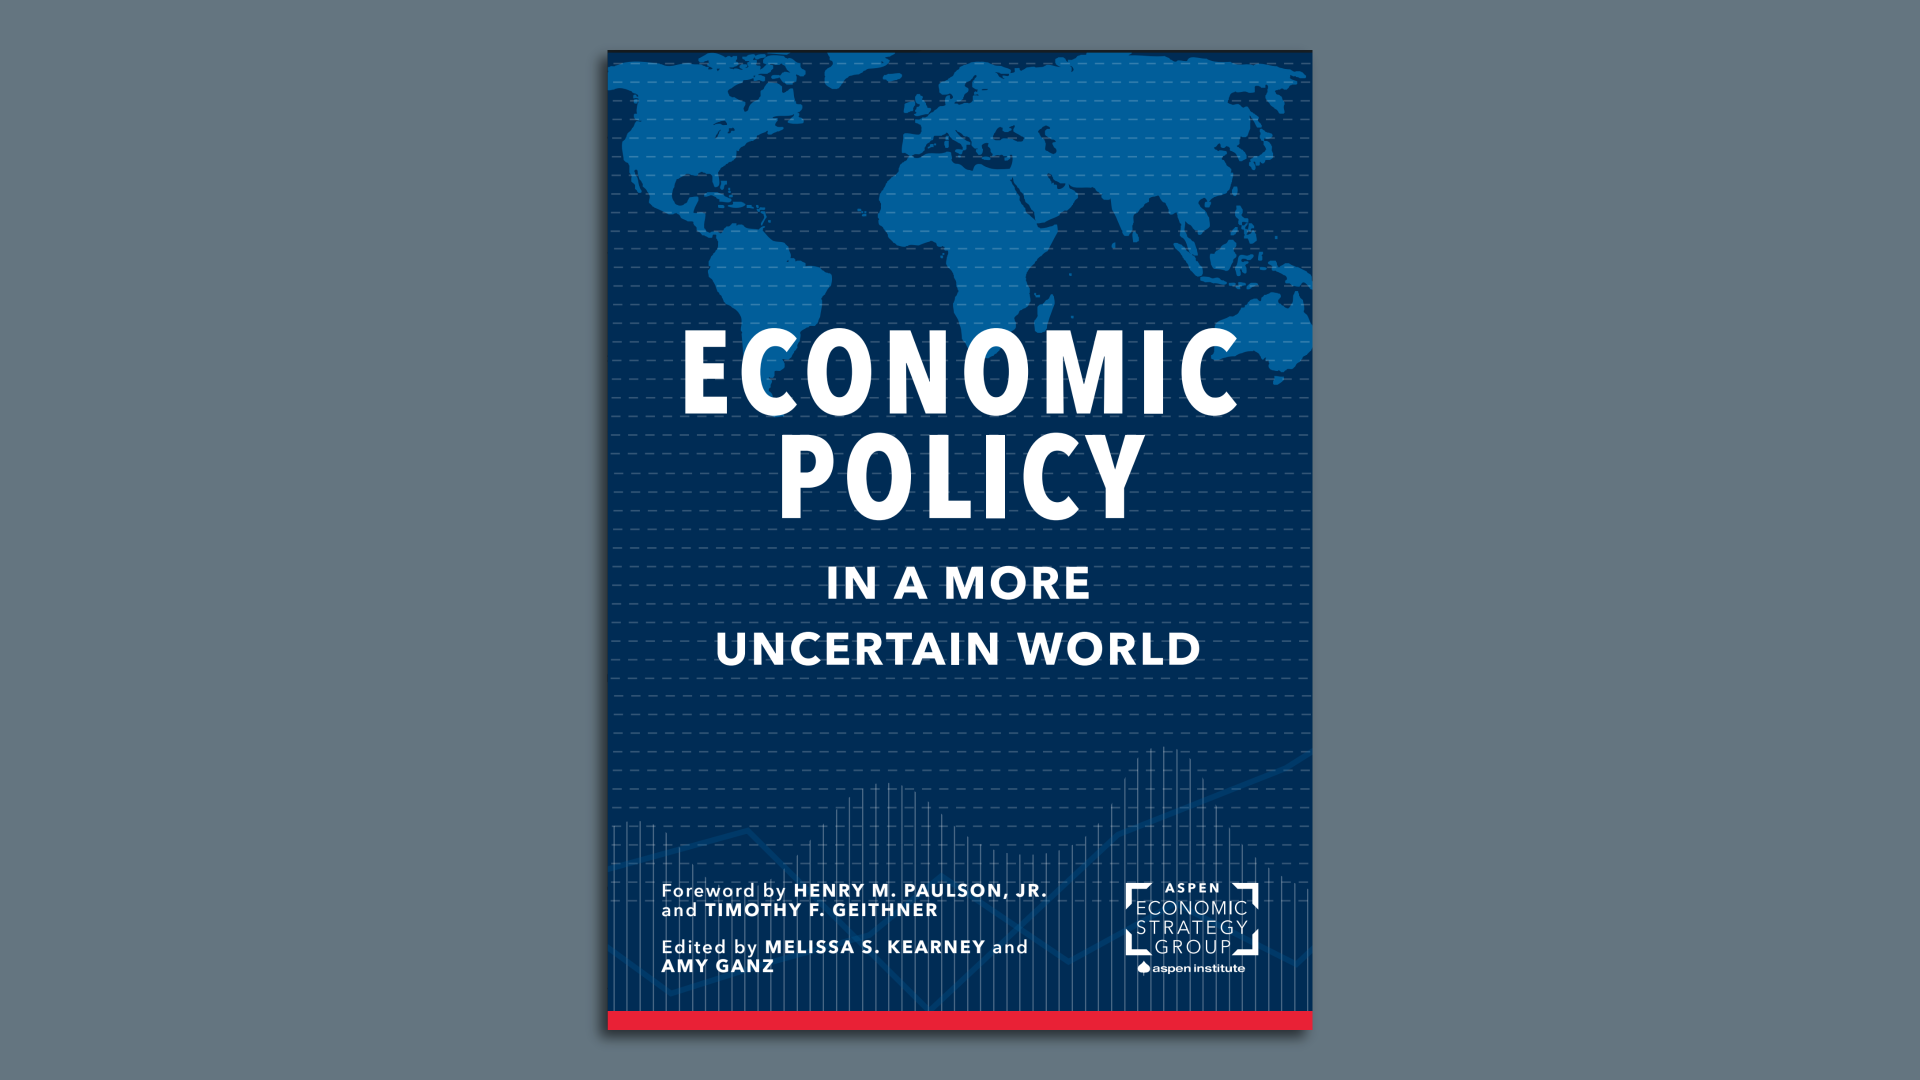 The cover of "Economic Policy in a More Uncertain World"